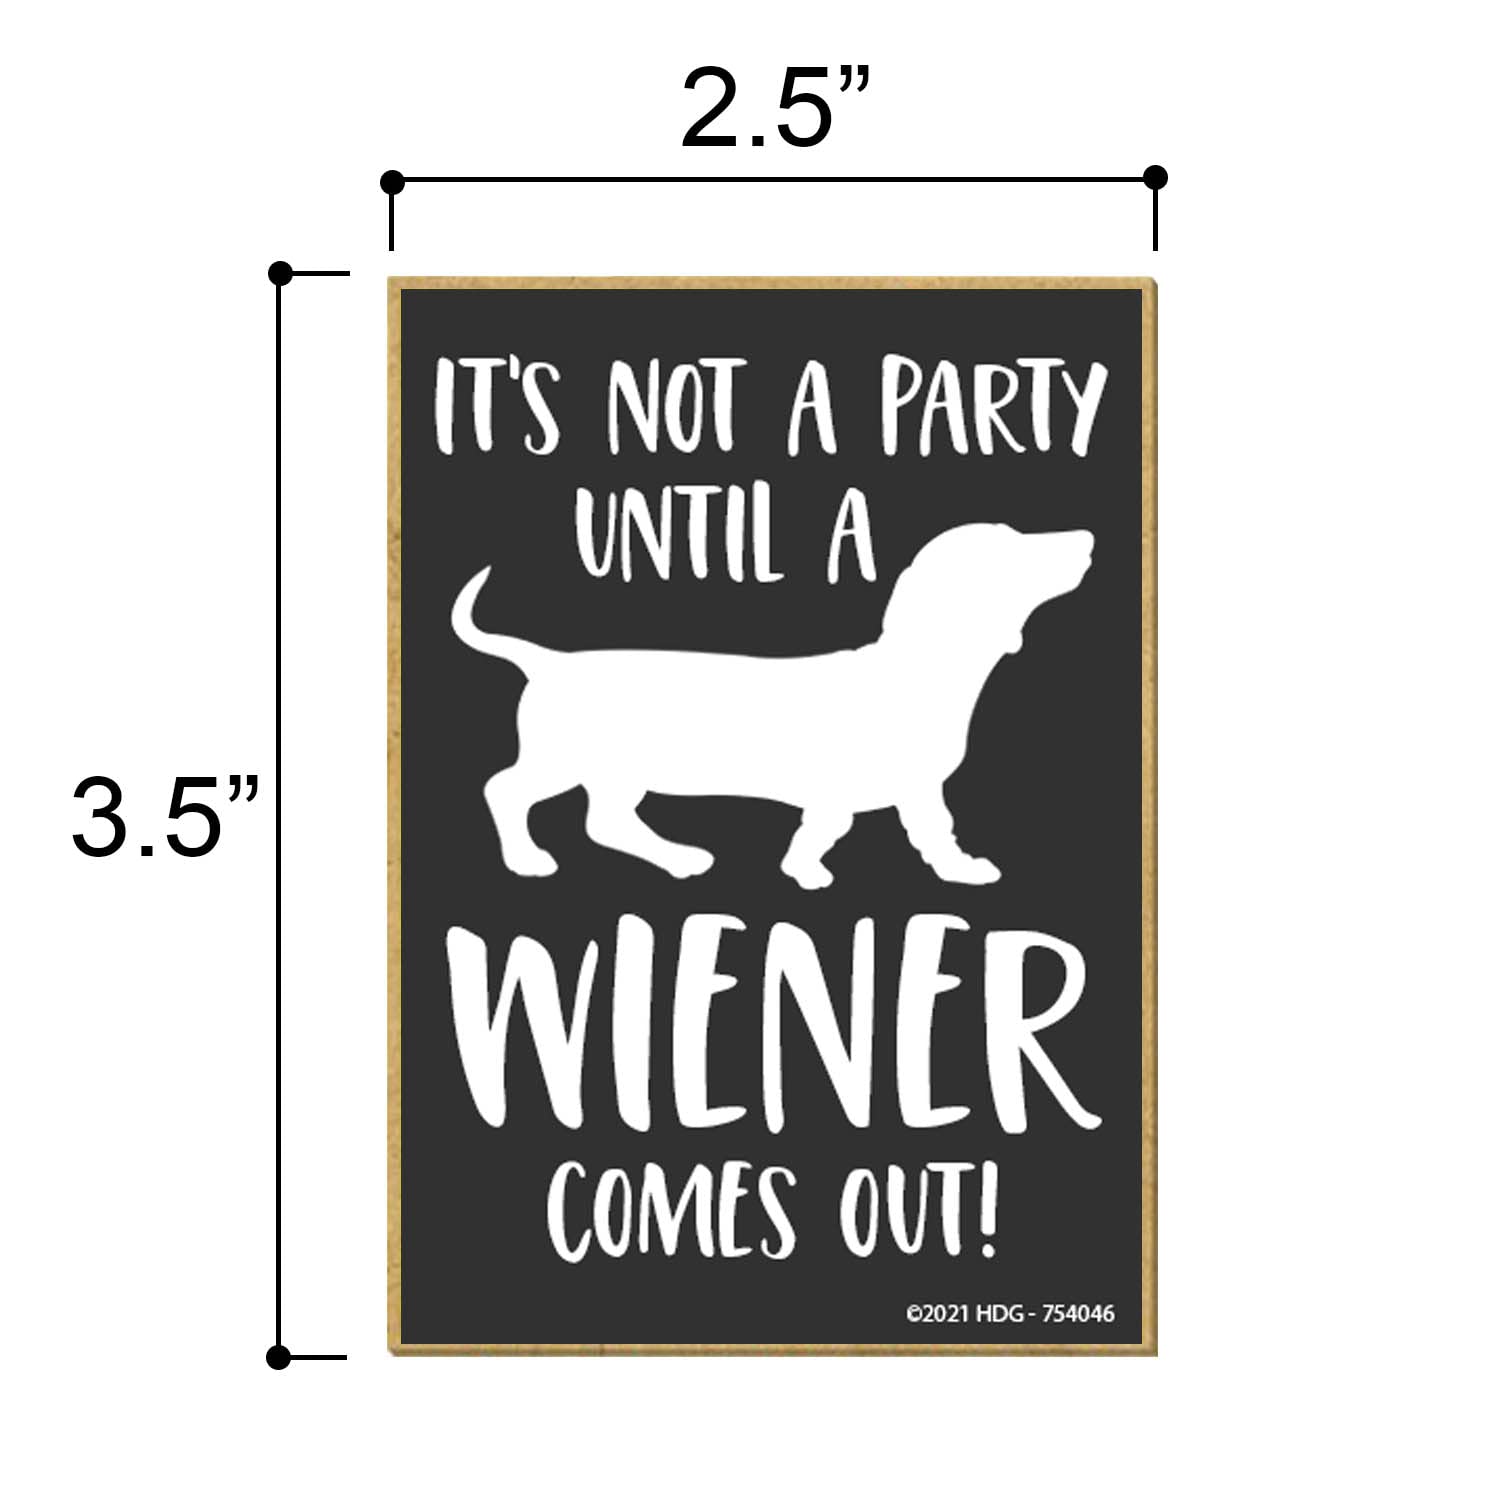 Honey Dew Gifts, It's Not a Party Until a Wiener Comes Out, 2.5 inch by 3.5 inch, Made In USA, Funny Fridge, Locker Decorations, Refrigerator Magnet, Decorative Funny Magnets, Dachshund Decor, Dog Mom